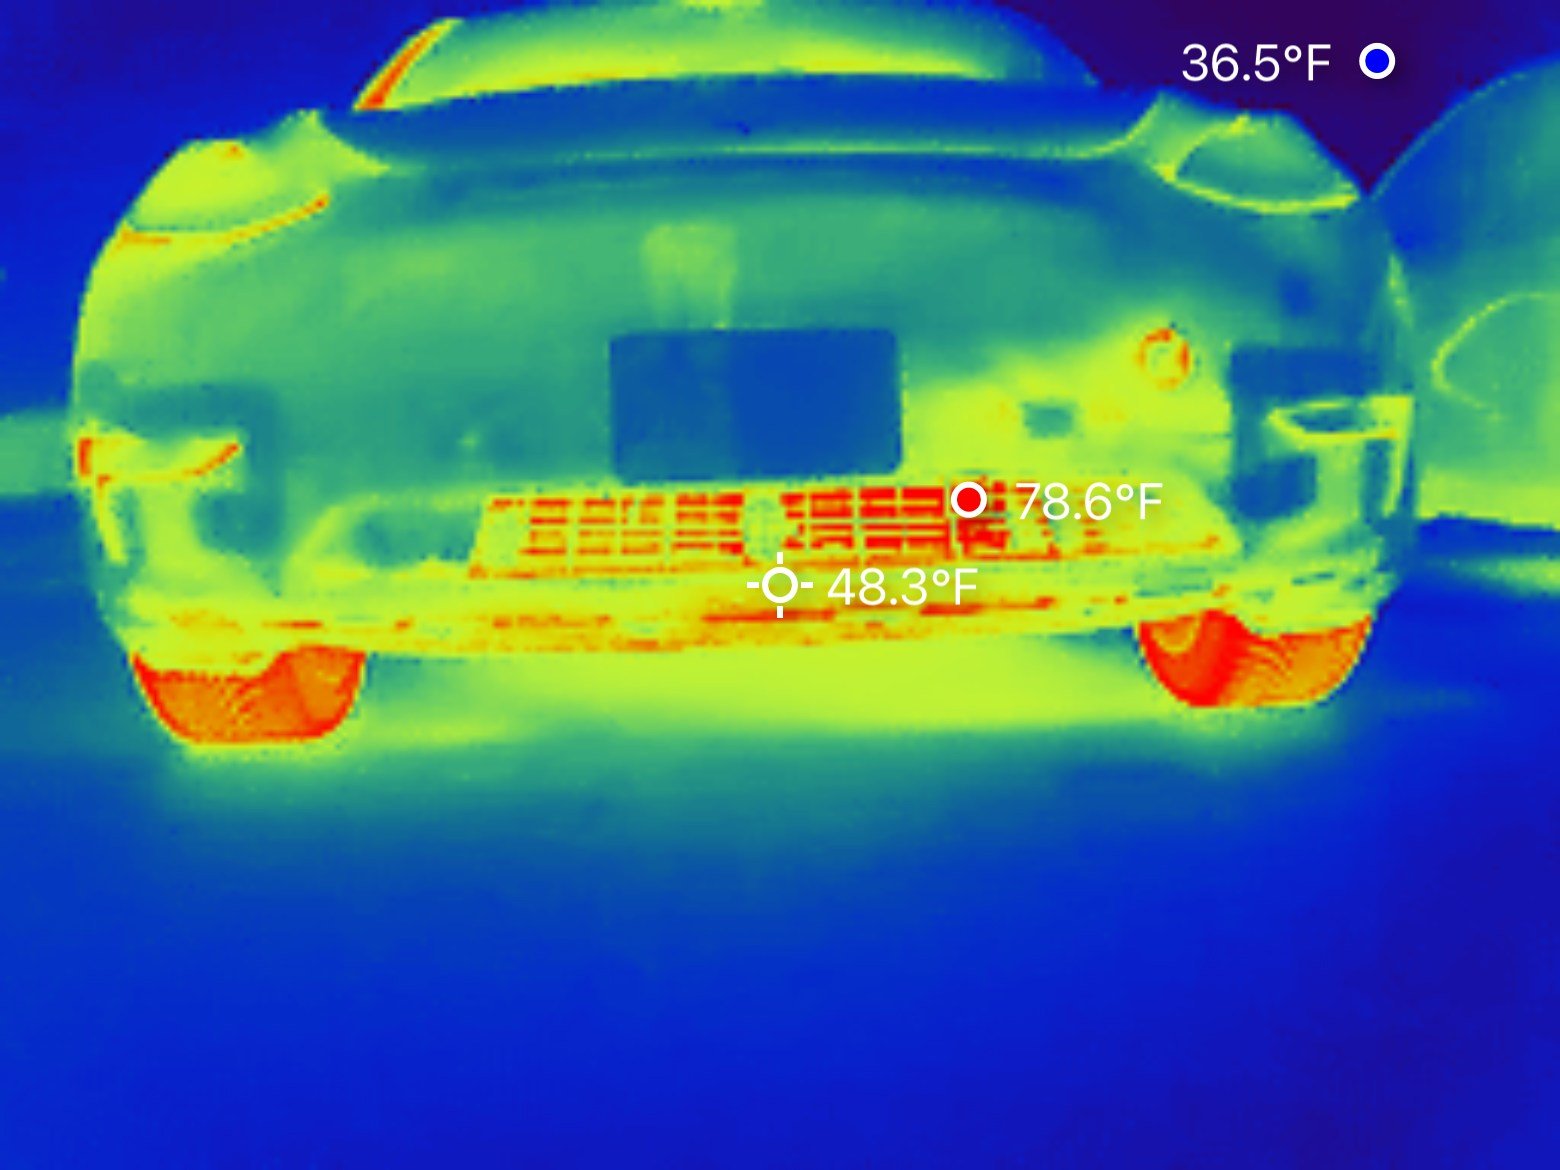 Model Y venting heat through vents, thermal image